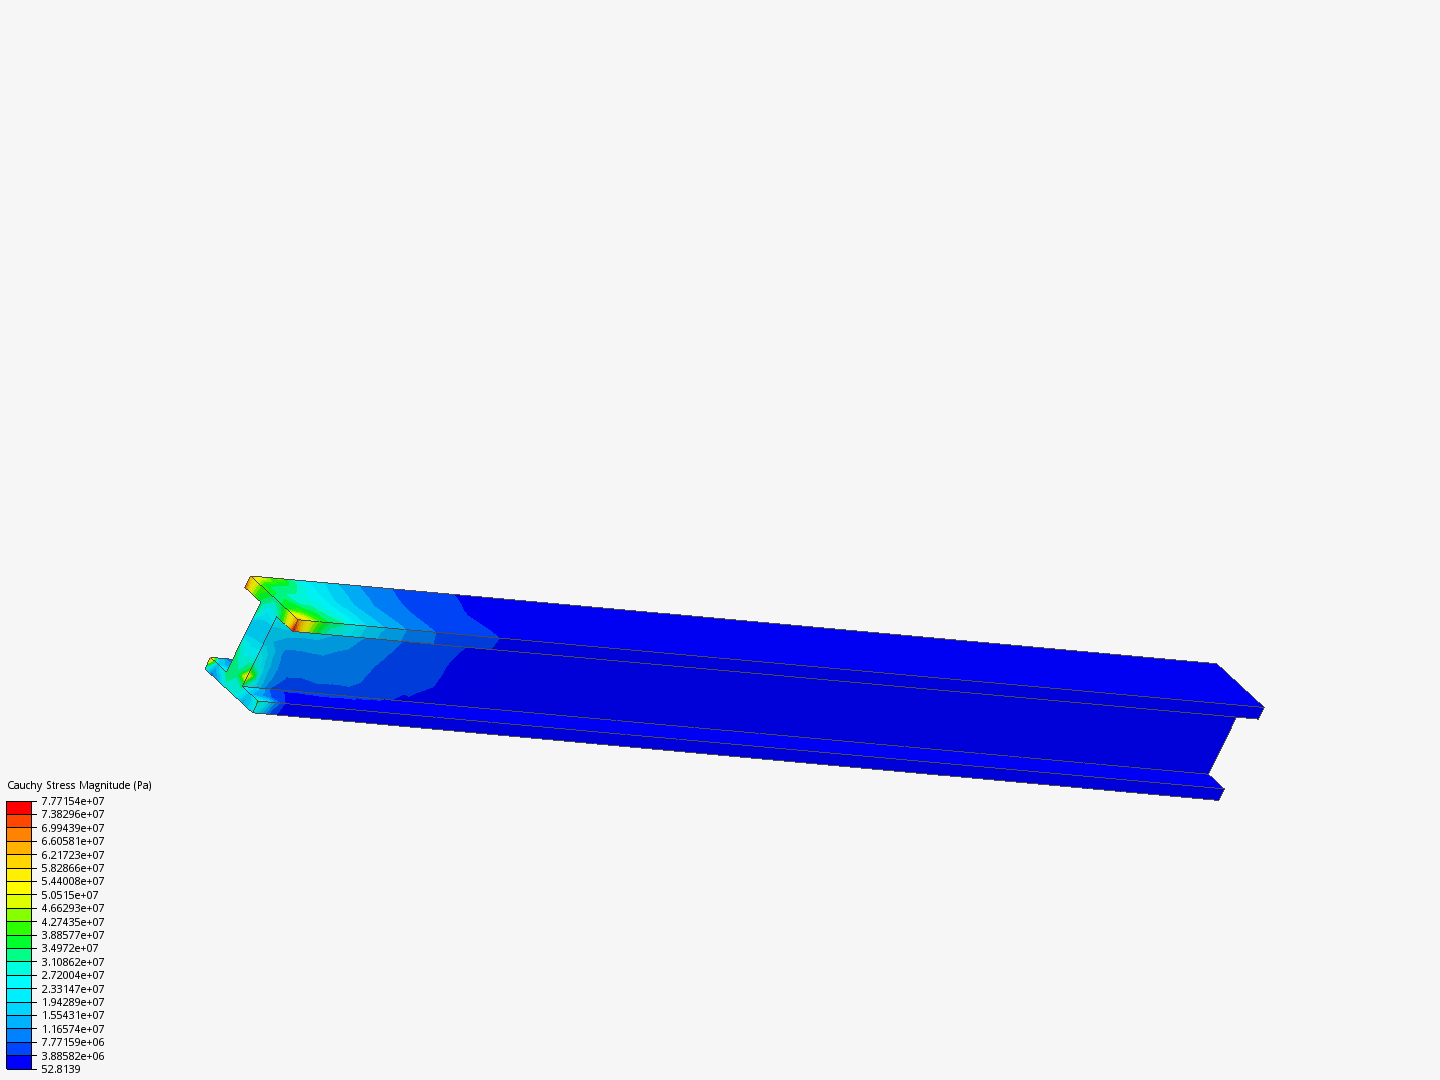 SimScale for Engineering Simulations - FEA for Beginners - Static Analysis of an I Beam - Project 1 - Copy - Copy image